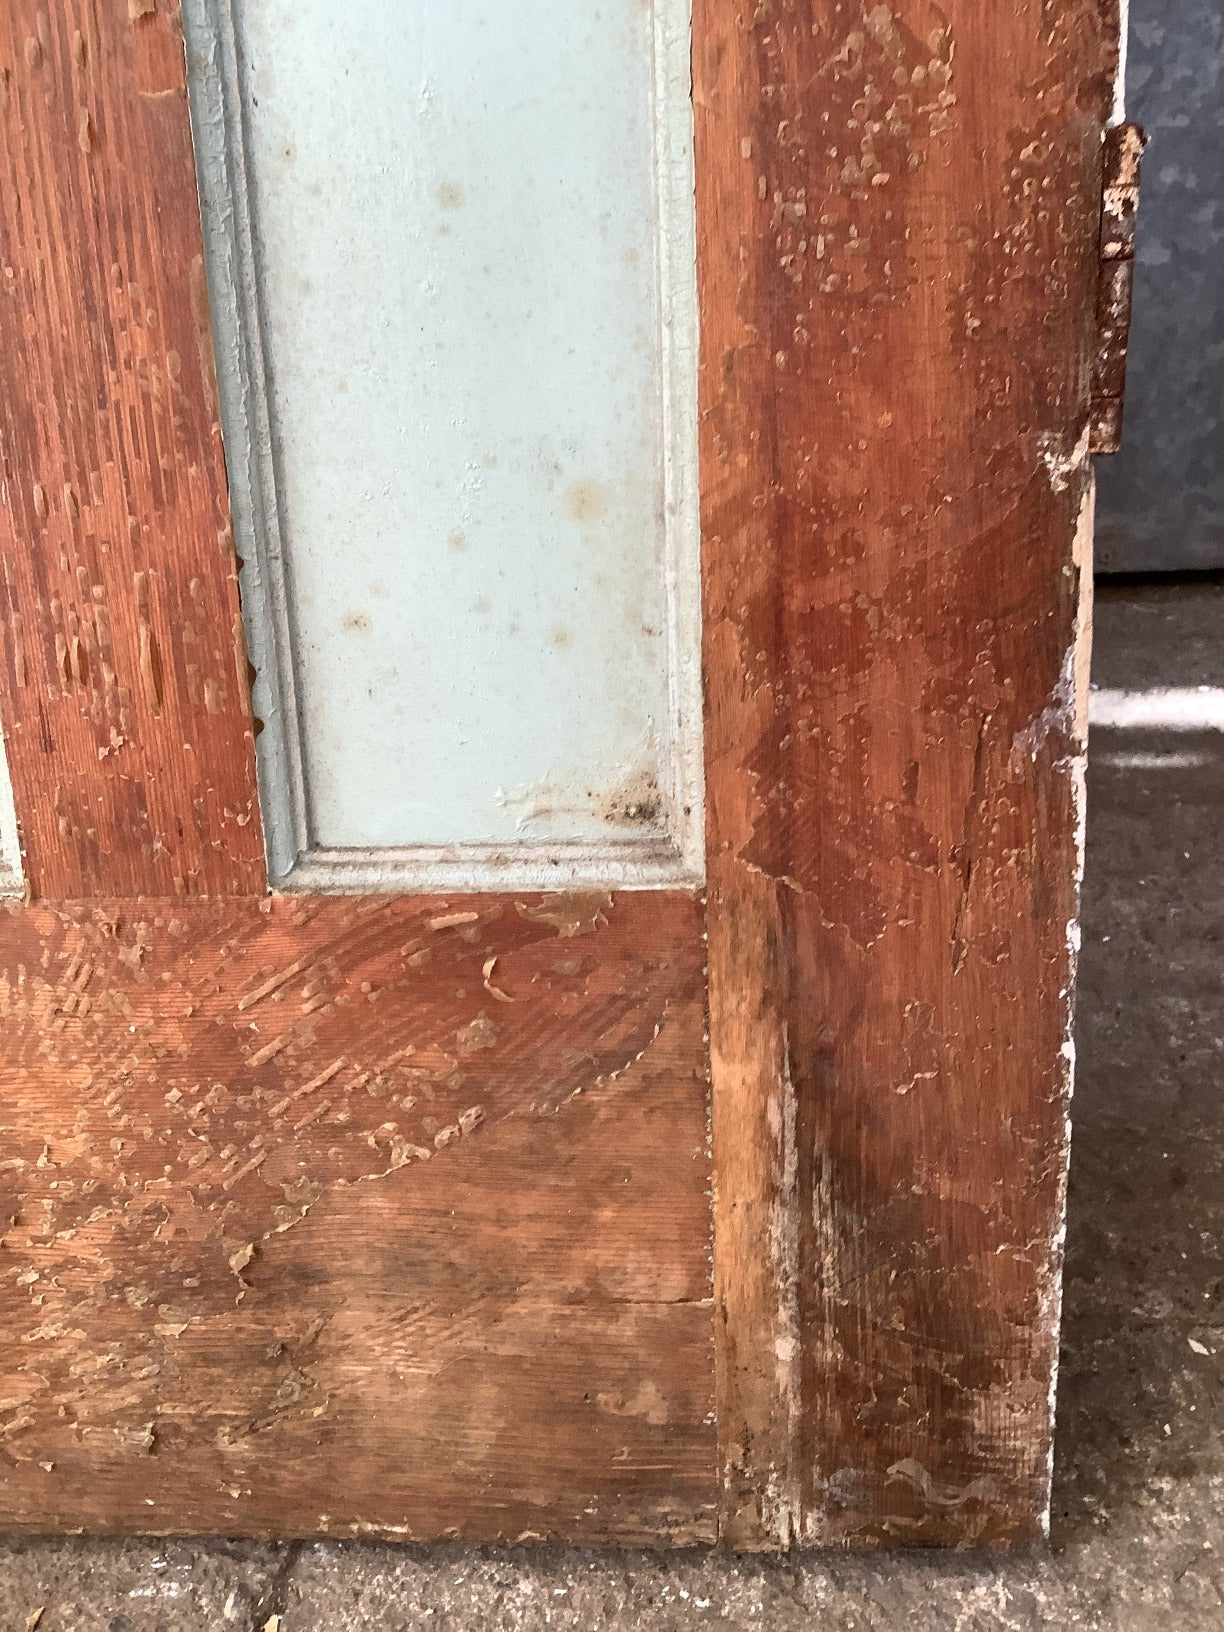 6th Picture showing old glue from a covering panel stick to the door